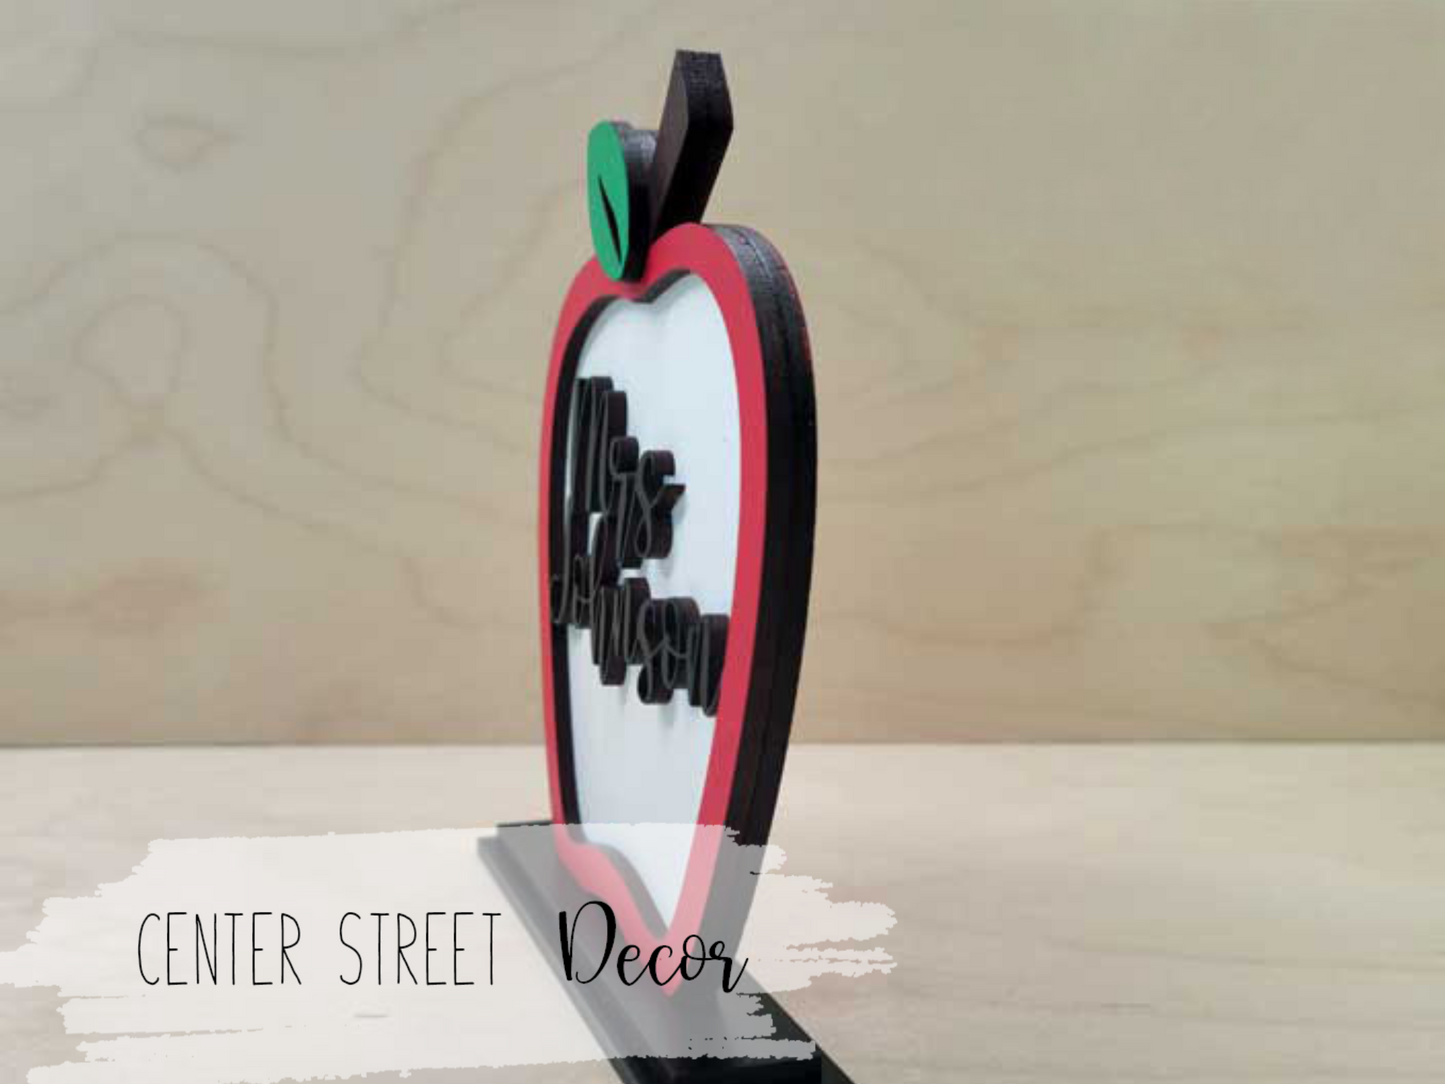 Teacher Personalized Apple Sign